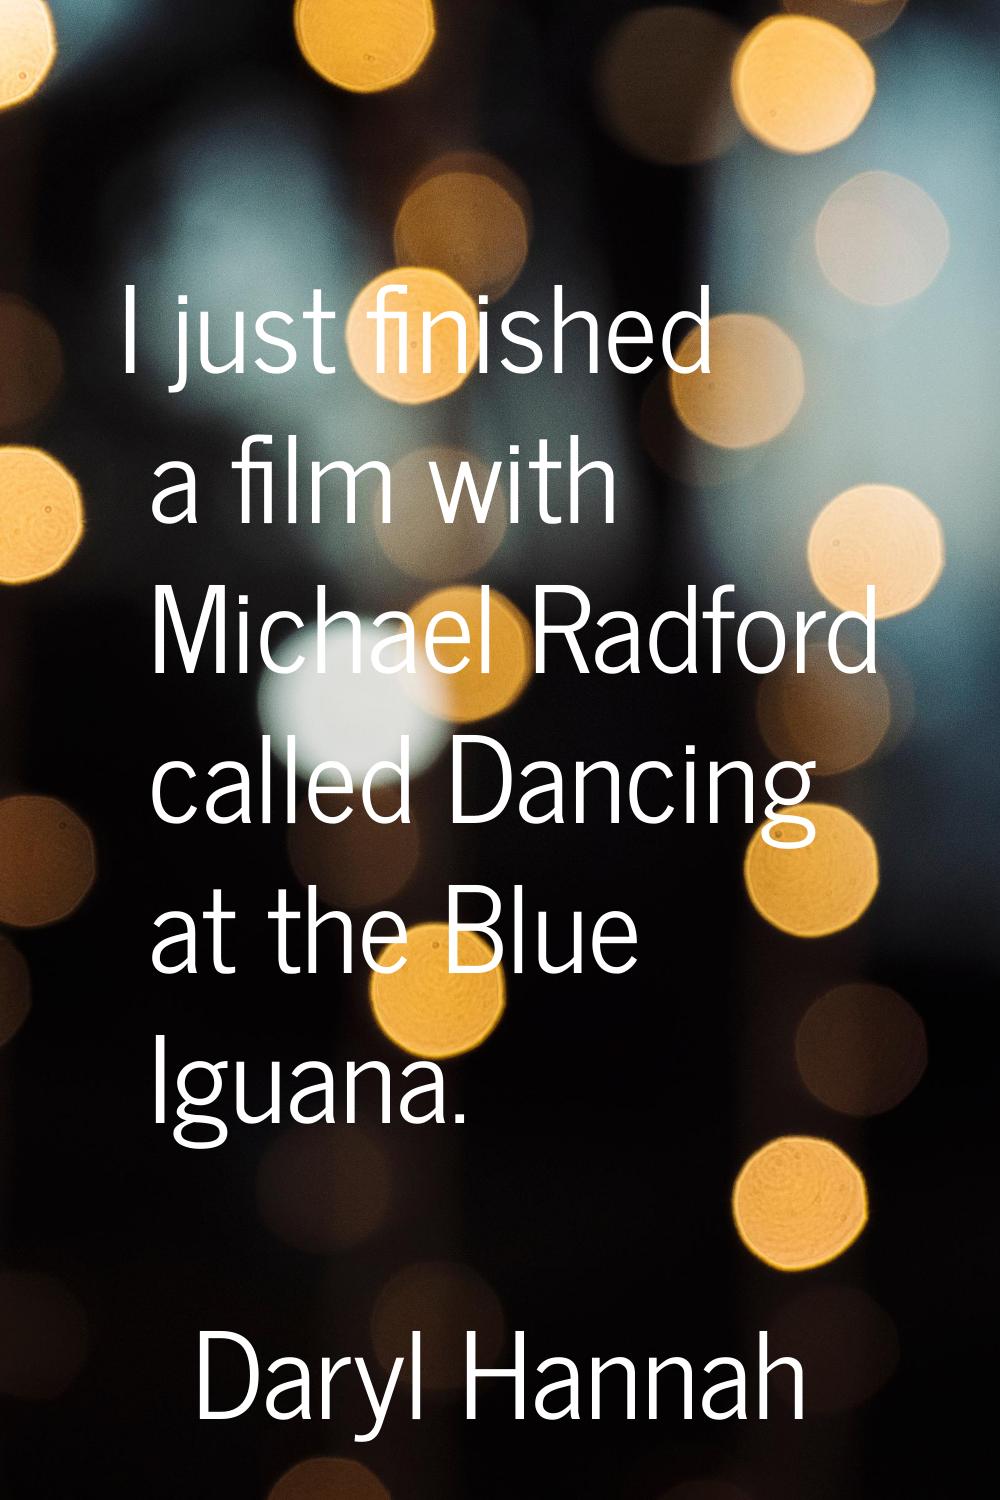 I just finished a film with Michael Radford called Dancing at the Blue Iguana.